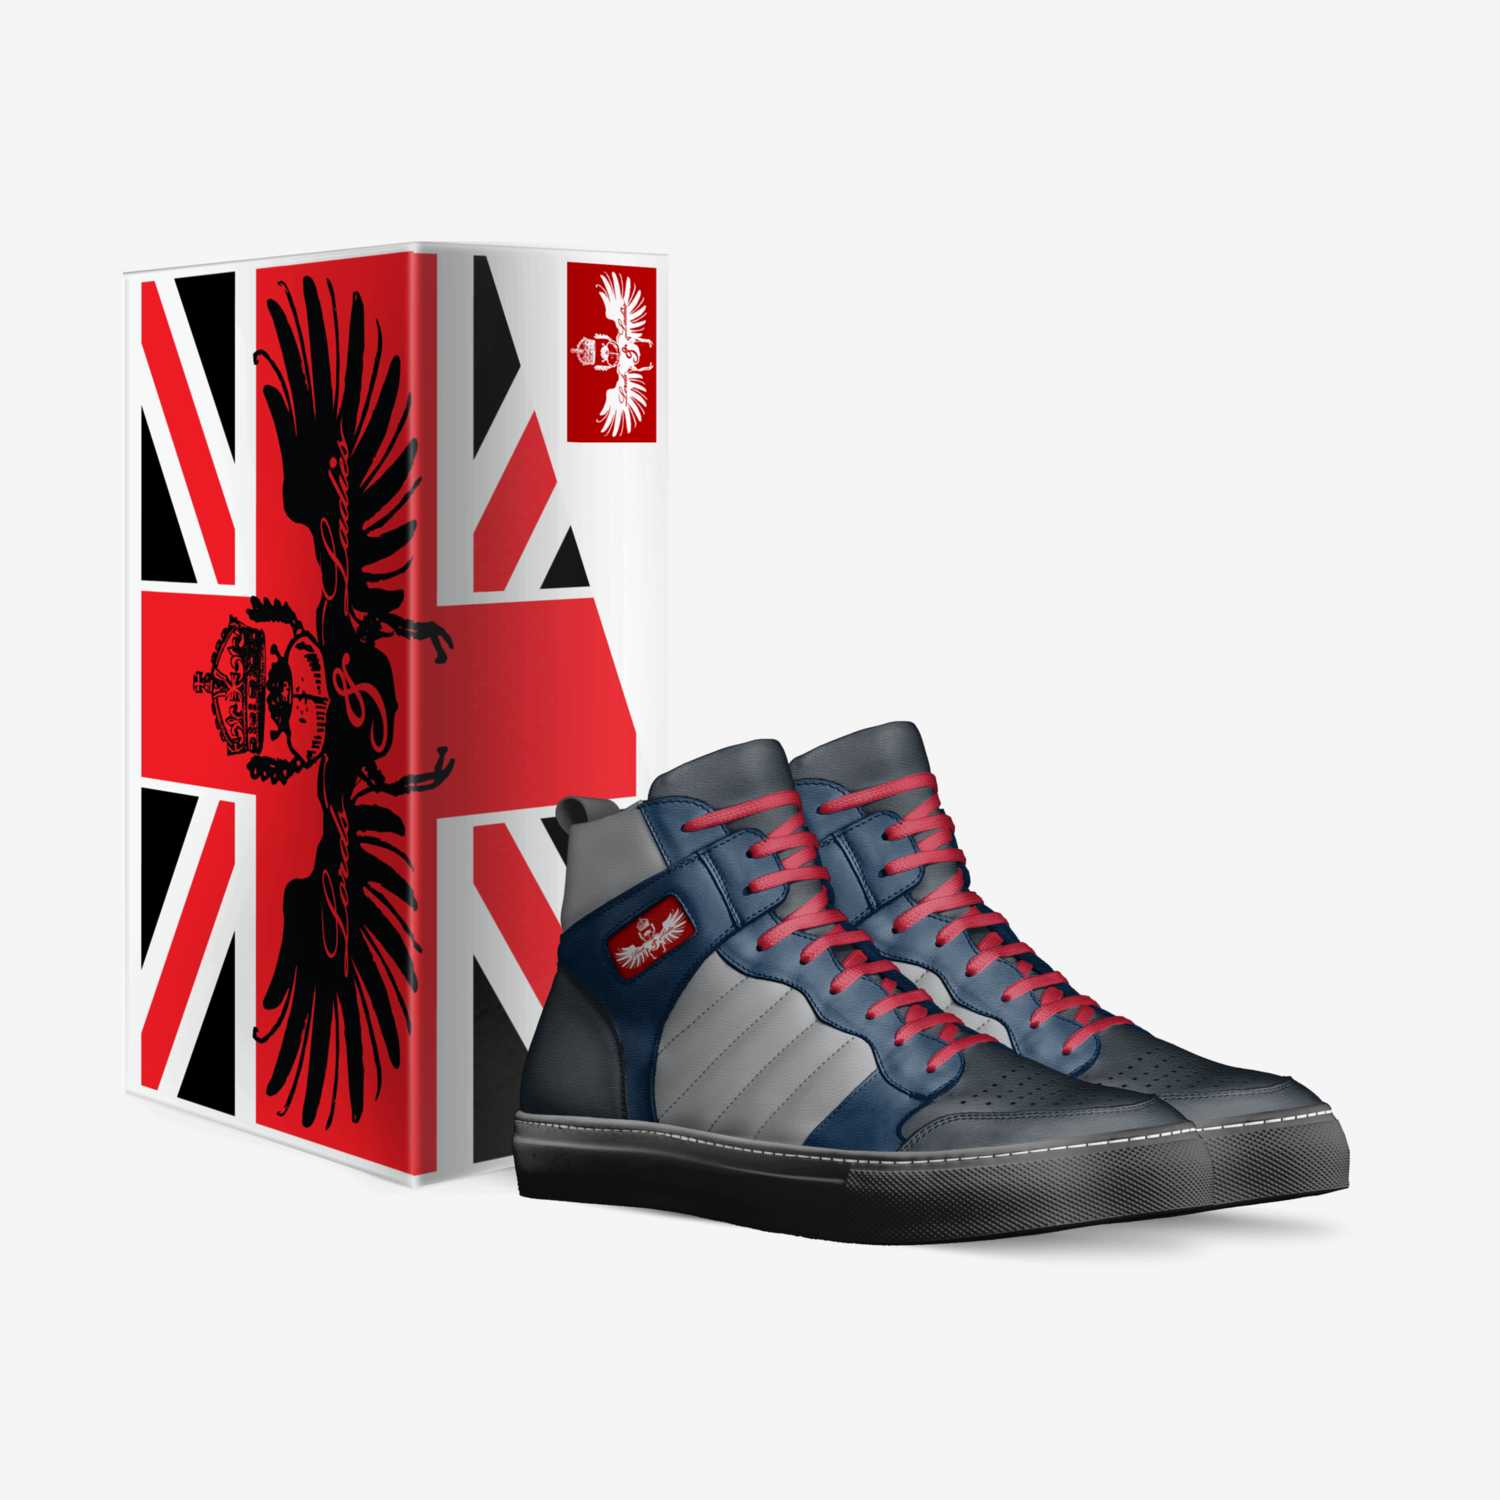 Empire-1 custom made in Italy shoes by David Wall | Box view